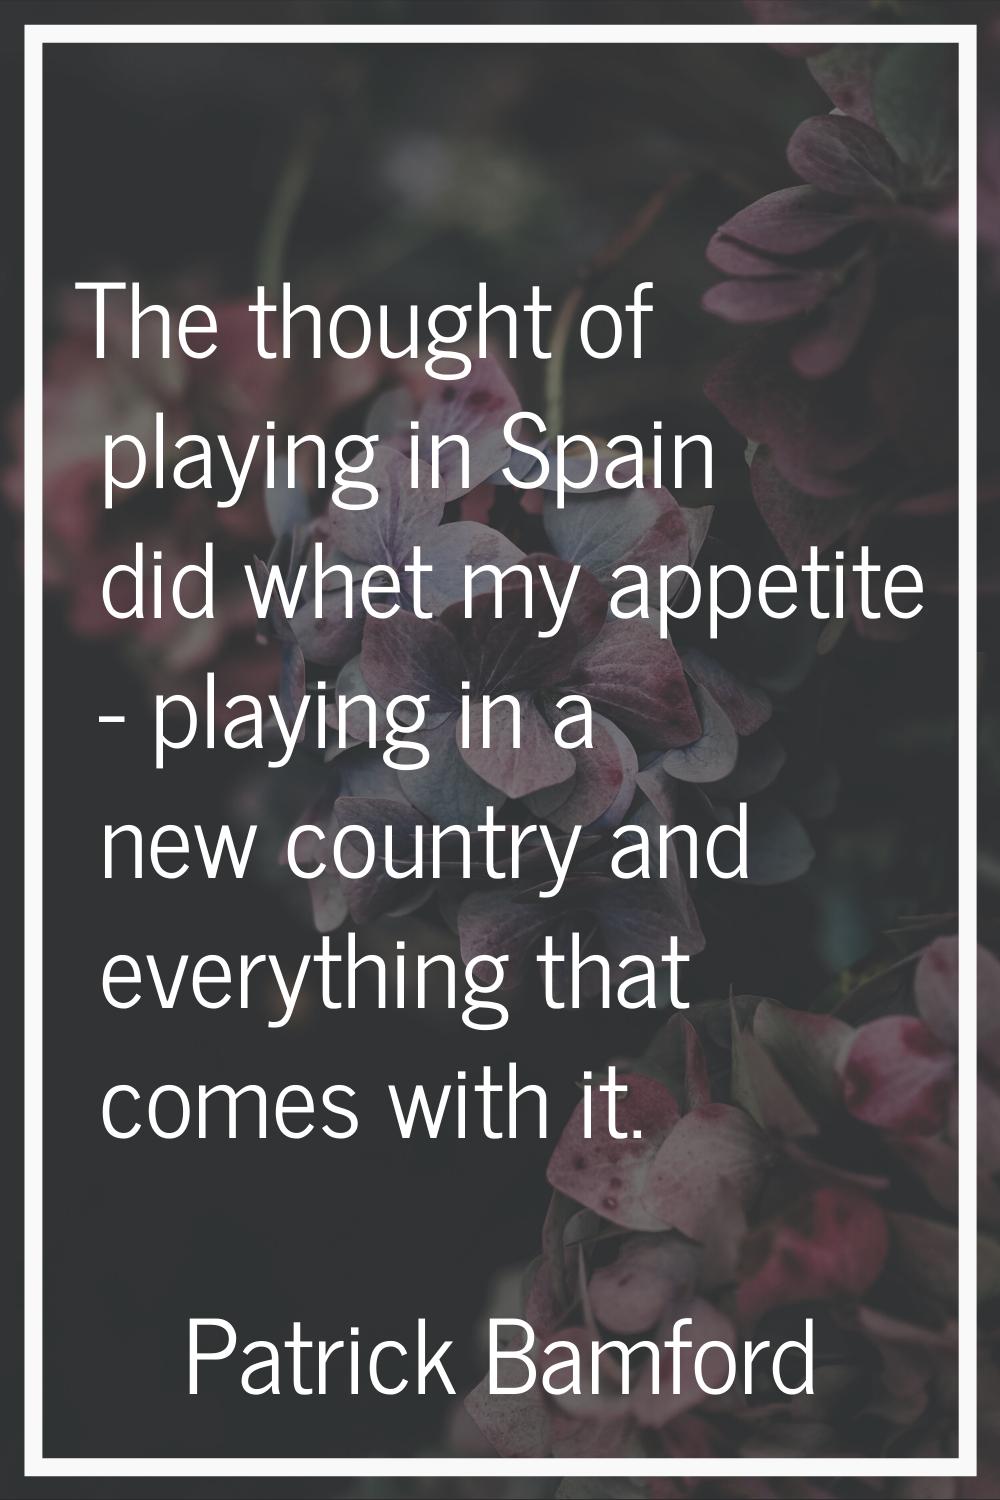 The thought of playing in Spain did whet my appetite - playing in a new country and everything that